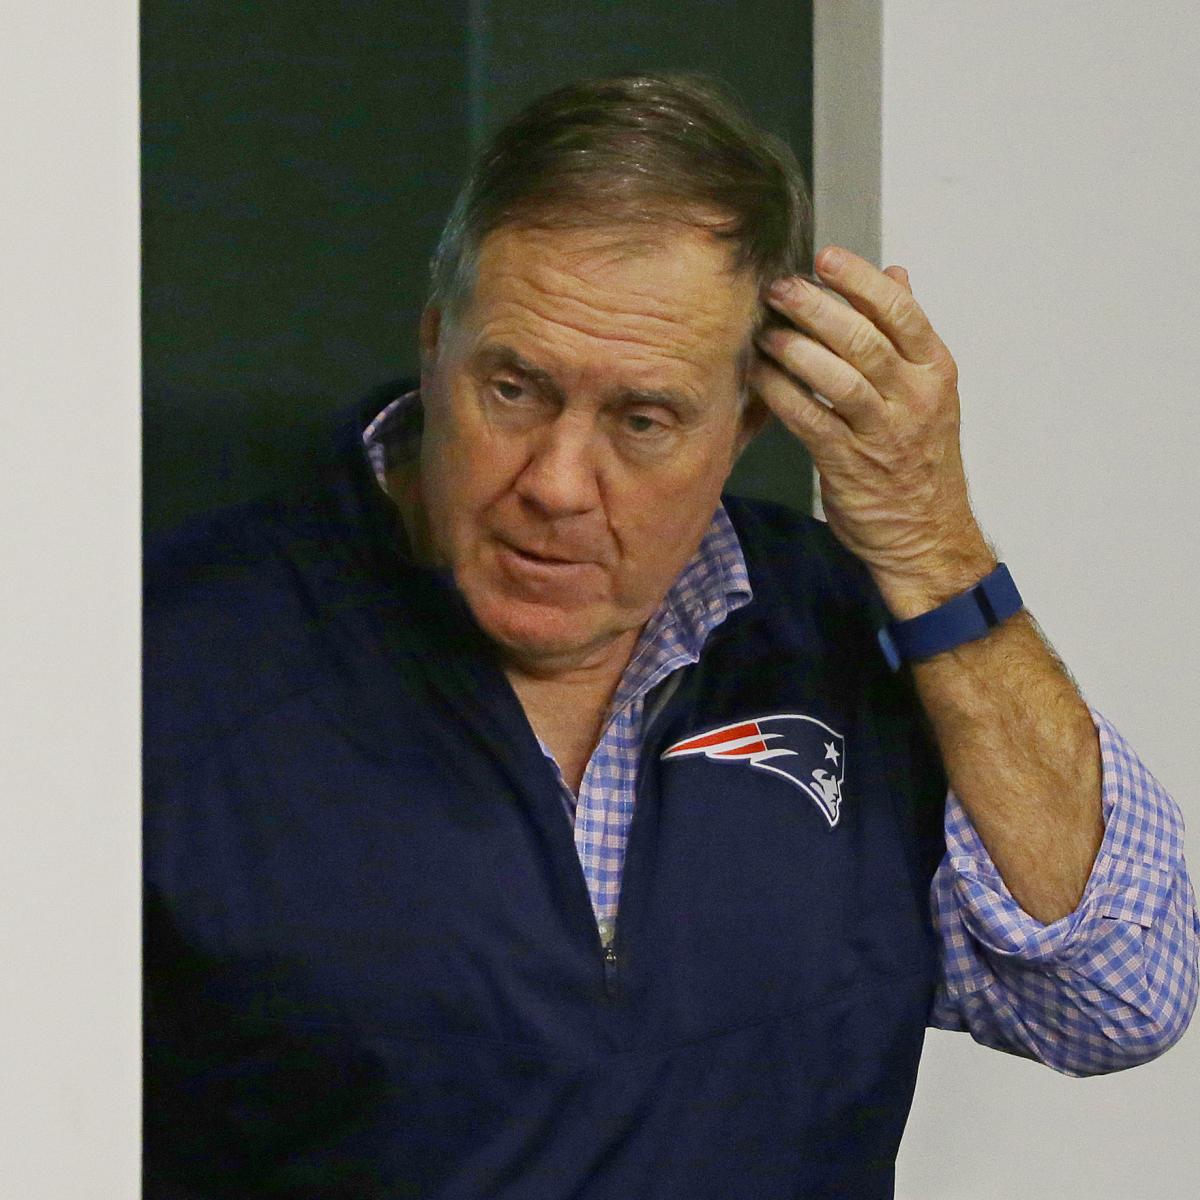 Bill Belichick Tells Reporters 'Let's End on a High Note,' Walks out of  Presser | News, Scores, Highlights, Stats, and Rumors | Bleacher Report